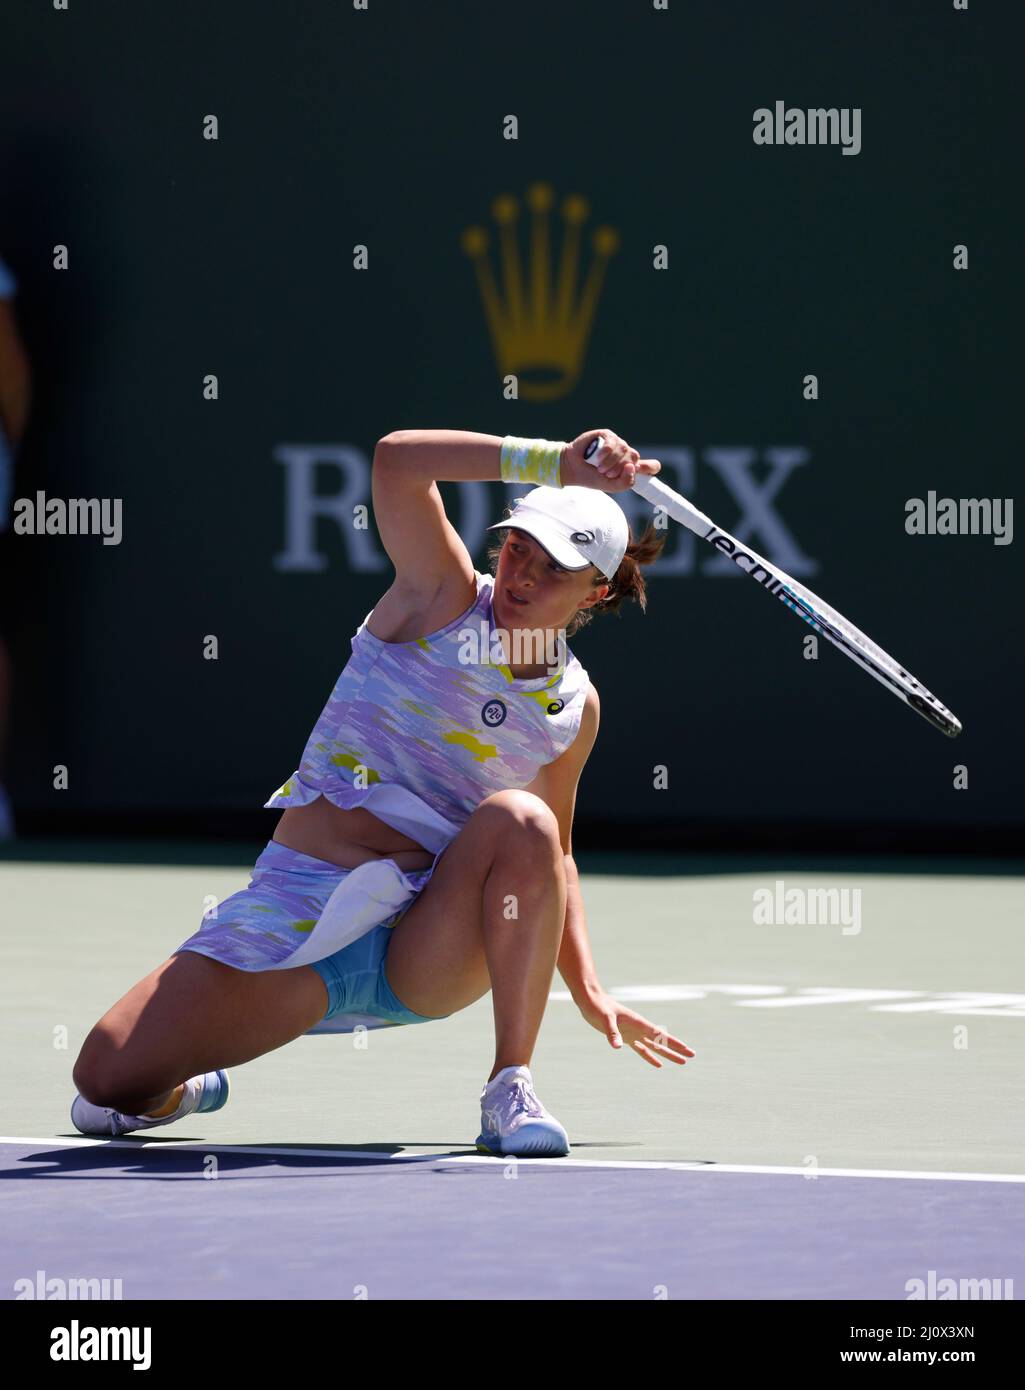 Indian Wells, California, USA. March 20, 2022 Iga Swiatek of Poland returns  a shot against Maria Sakkari of Greece in the women's singles finals of the  2022 BNP Paribas Open at Indian